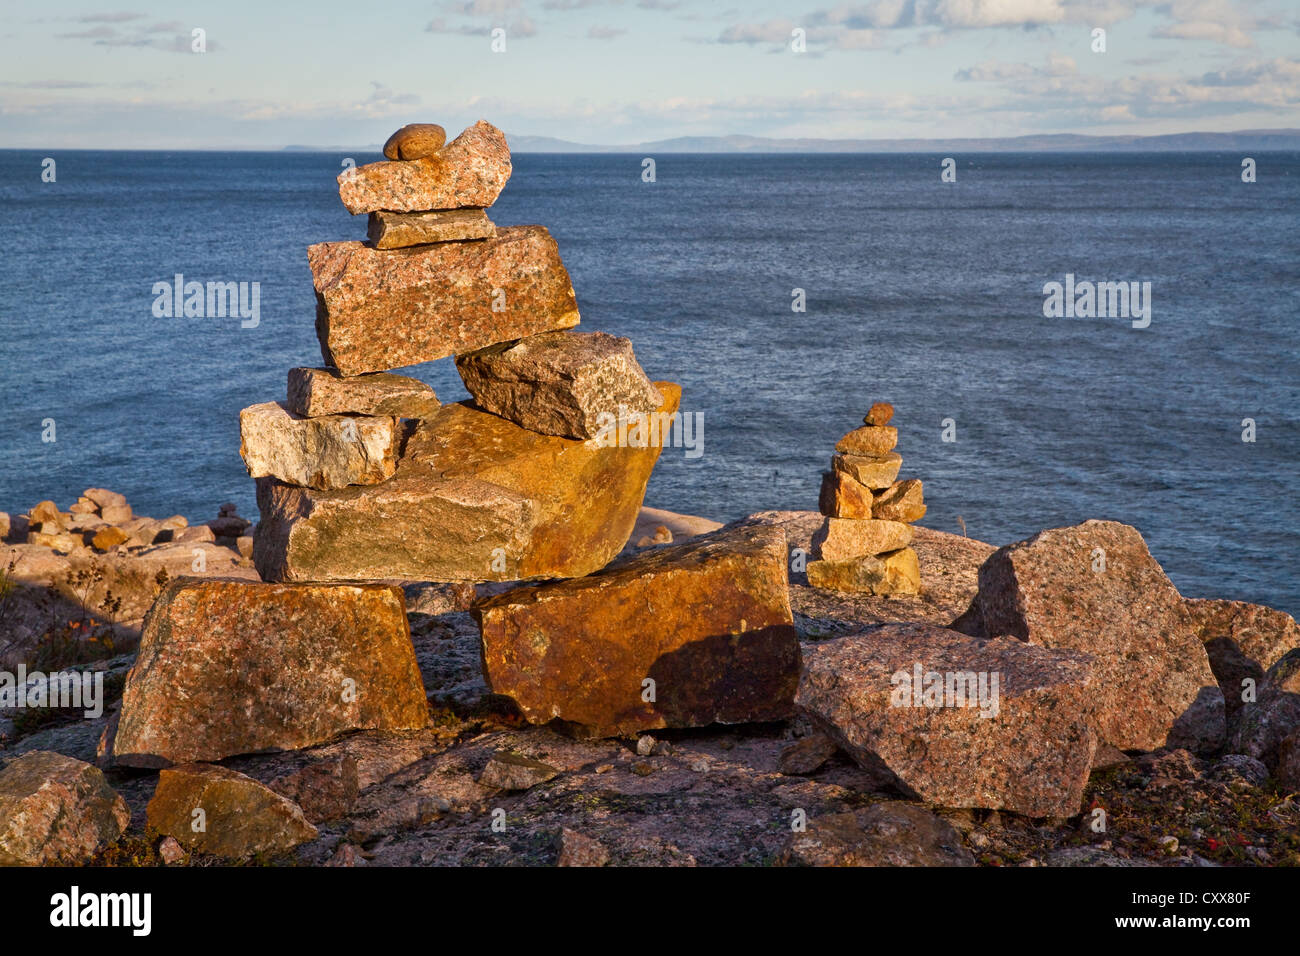 Sun sets on inuksuit (plural form of inuksuk) in front of the St. Lawrence river in the Essipit Innu community Stock Photo